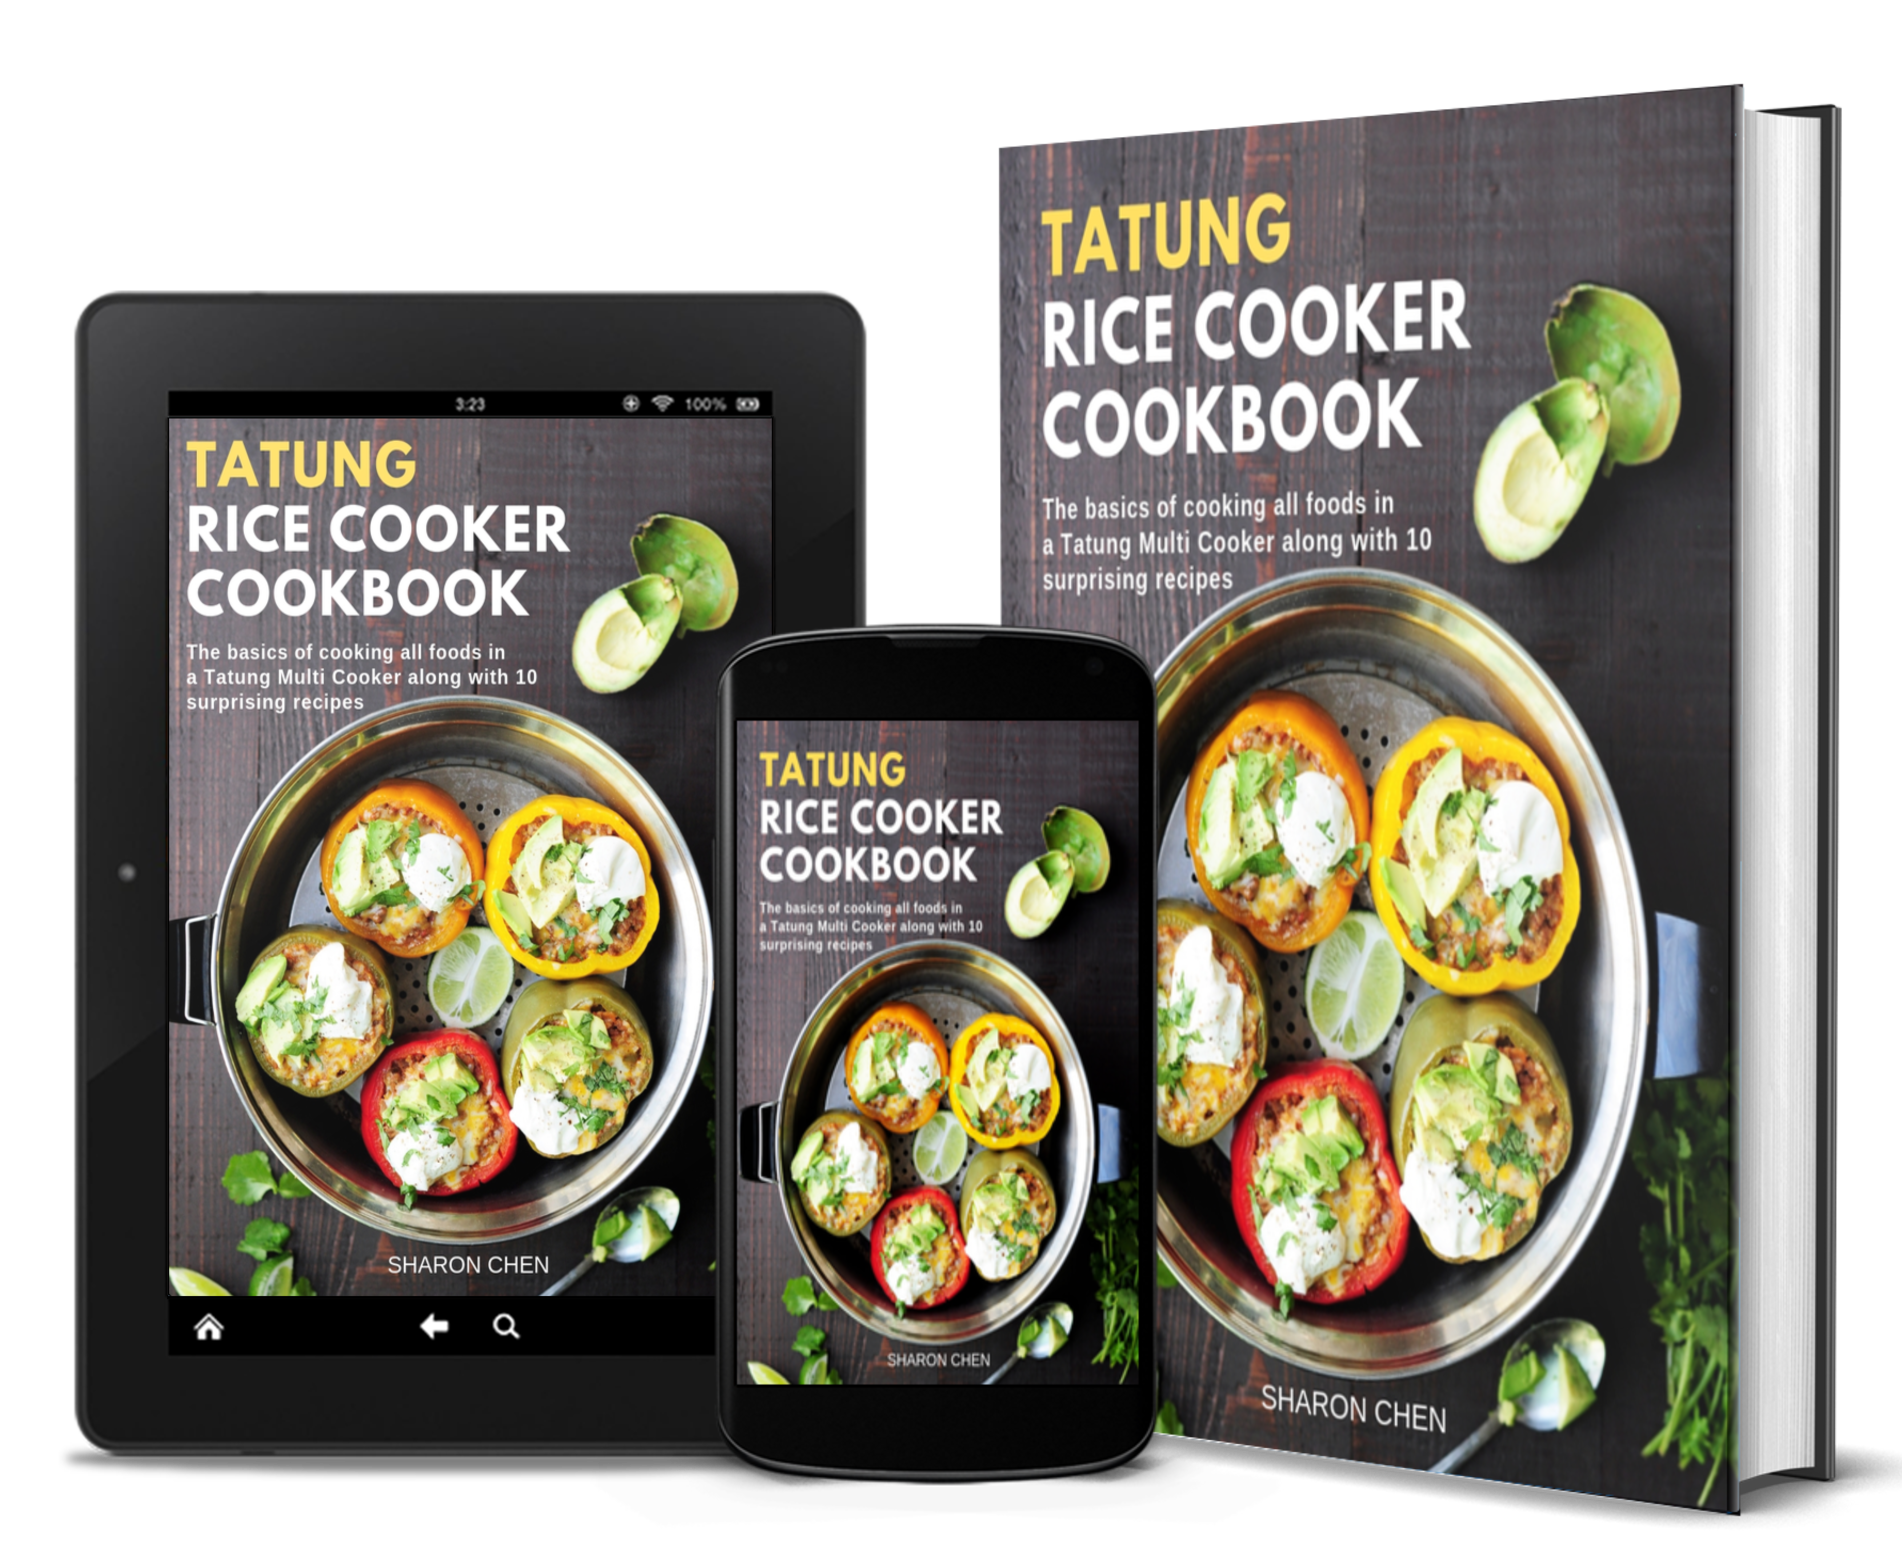 Tatung Rice Cooker Cookbook - all covers